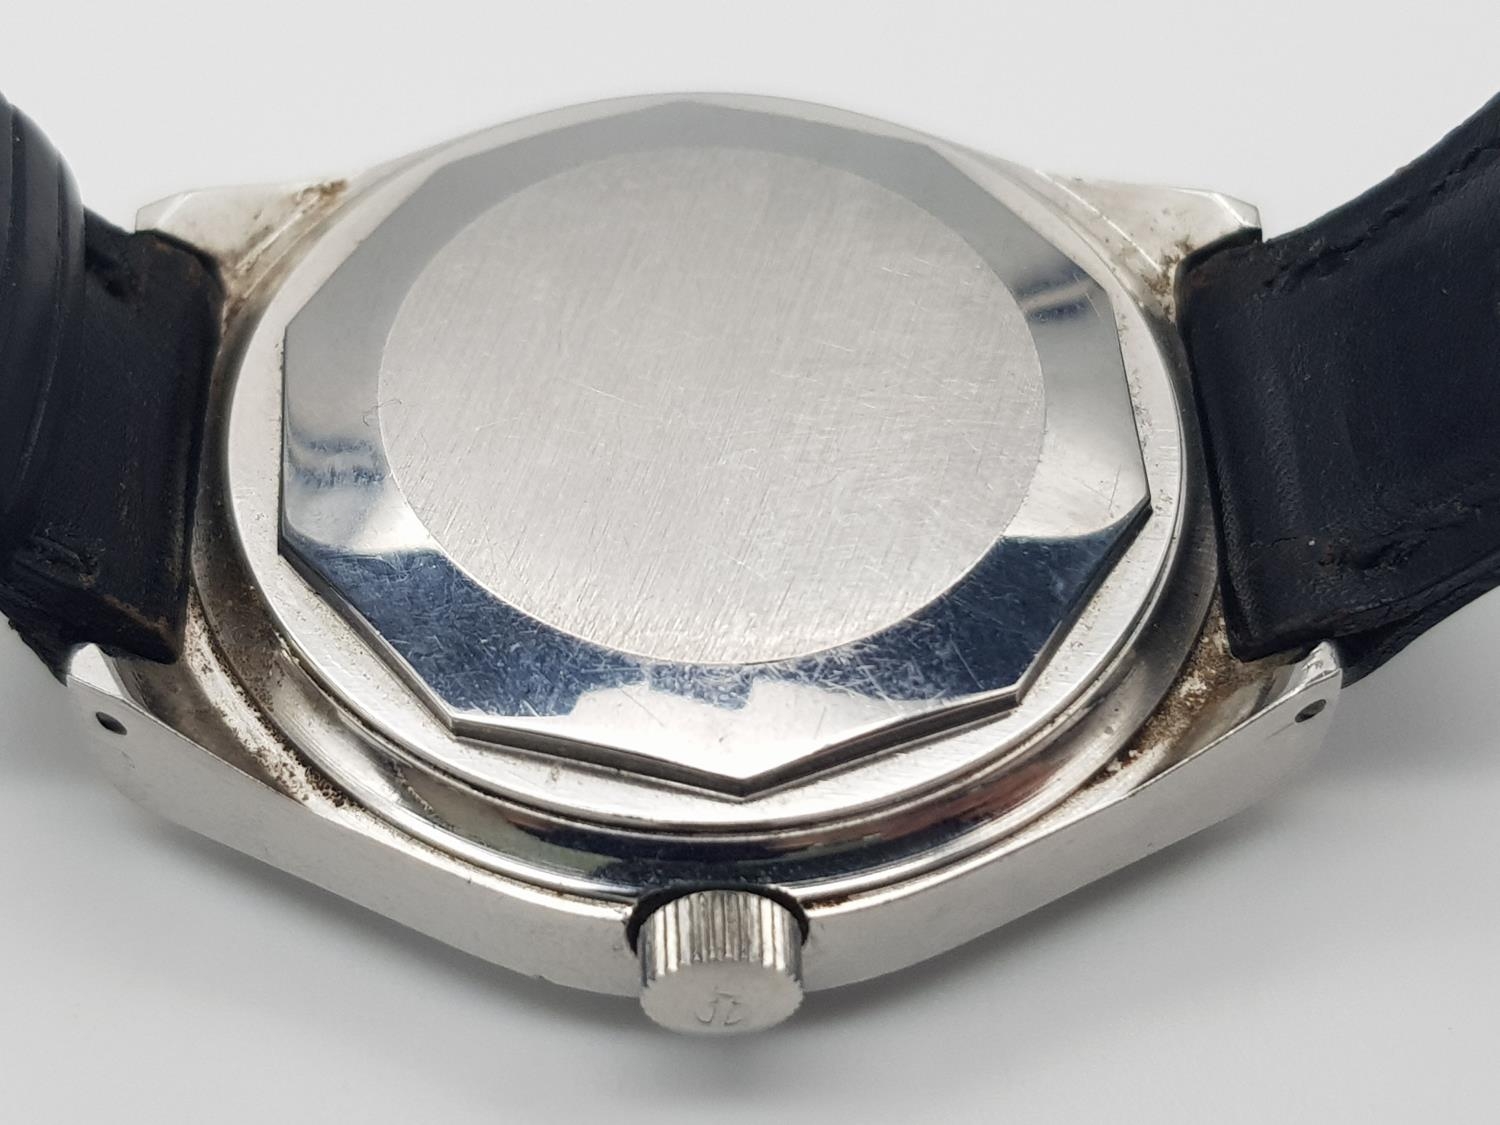 A Vintage Tissot Automatic Gents Watch. Black leather strap. Stainless steel case - 37mm. Blue - Image 4 of 6